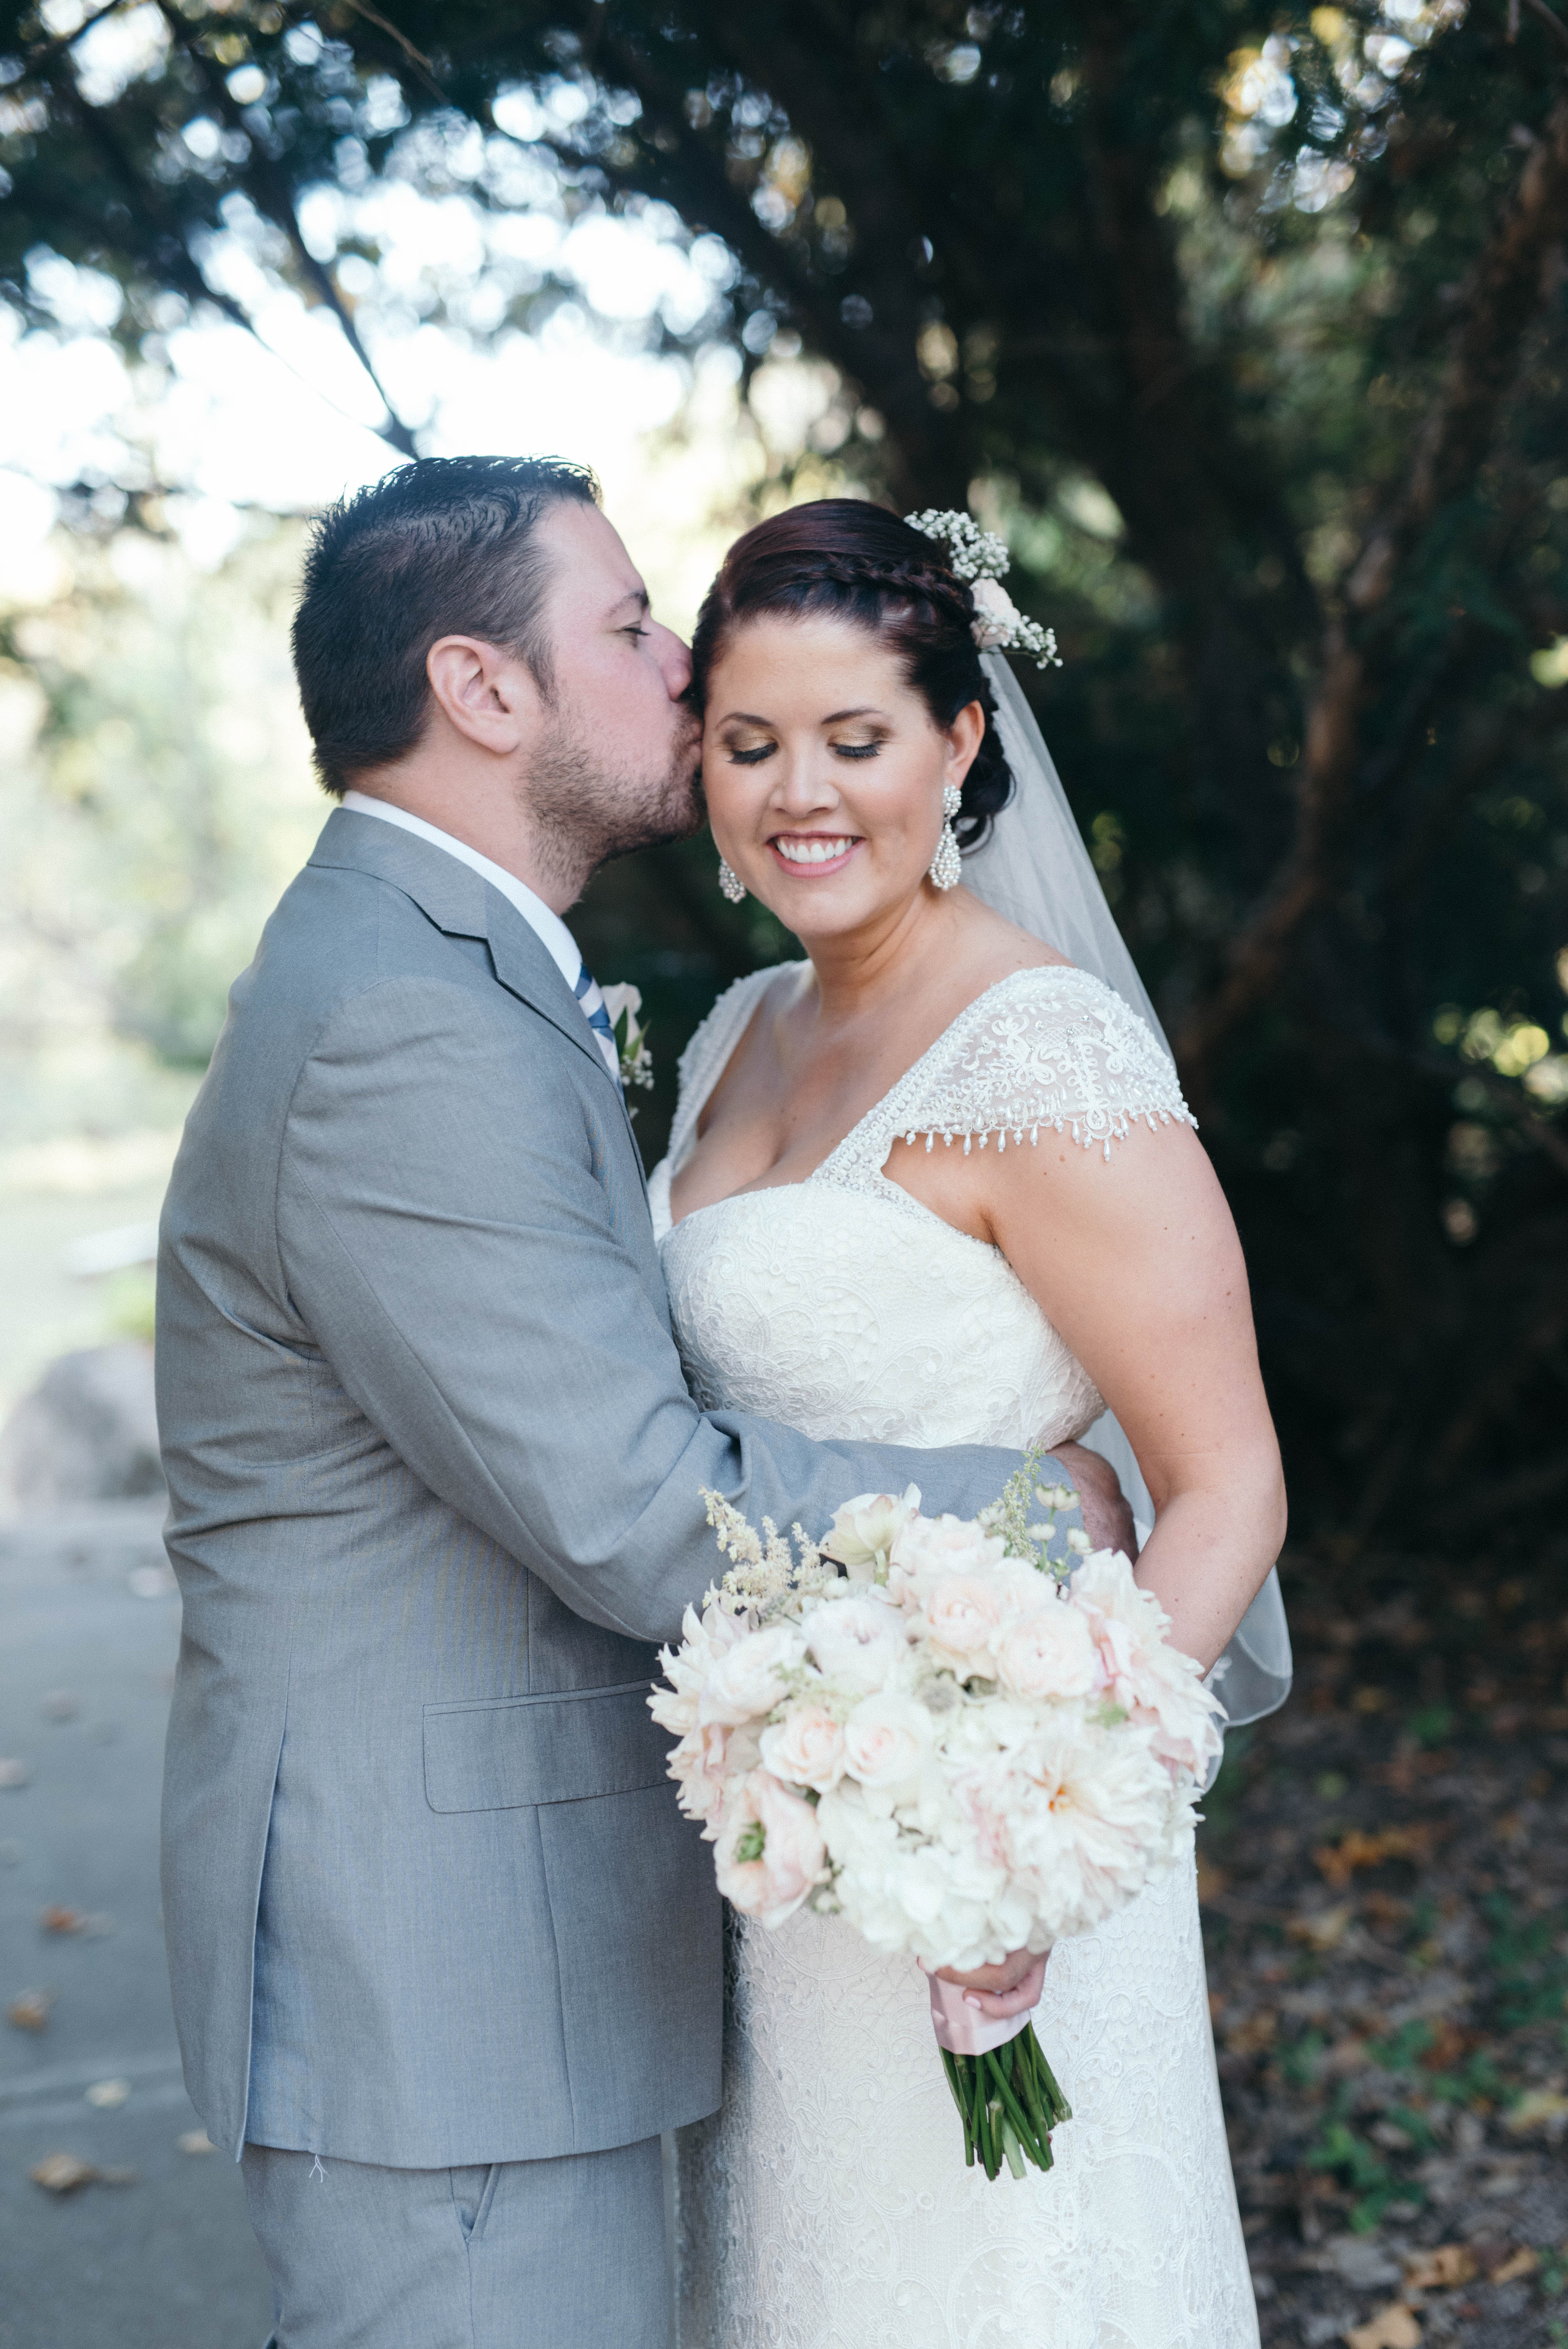 Jena + Alex married at the Elms Hotel